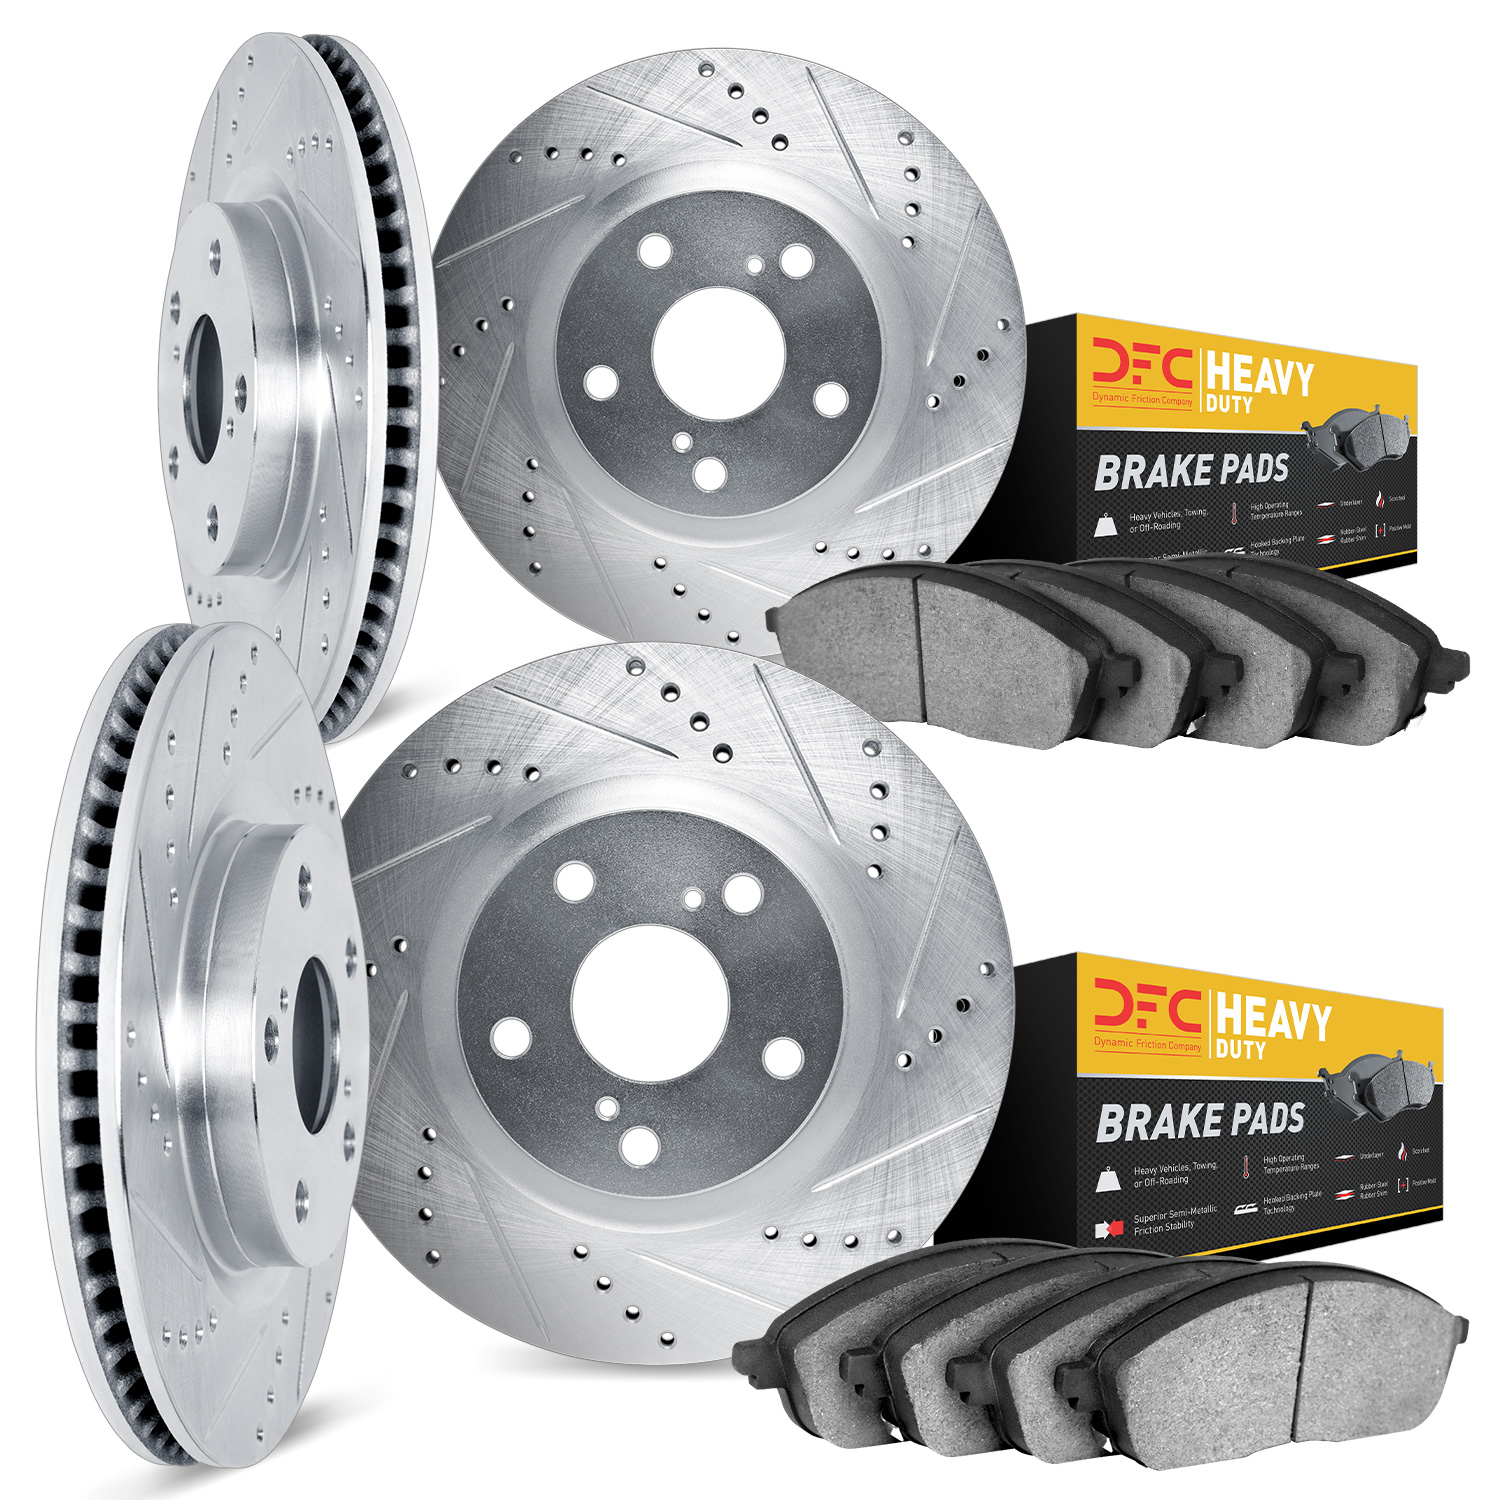 7204-48059 Drilled/Slotted Rotors w/Heavy-Duty Brake Pads Kit [Silver], 1998-2005 GM, Position: Front and Rear